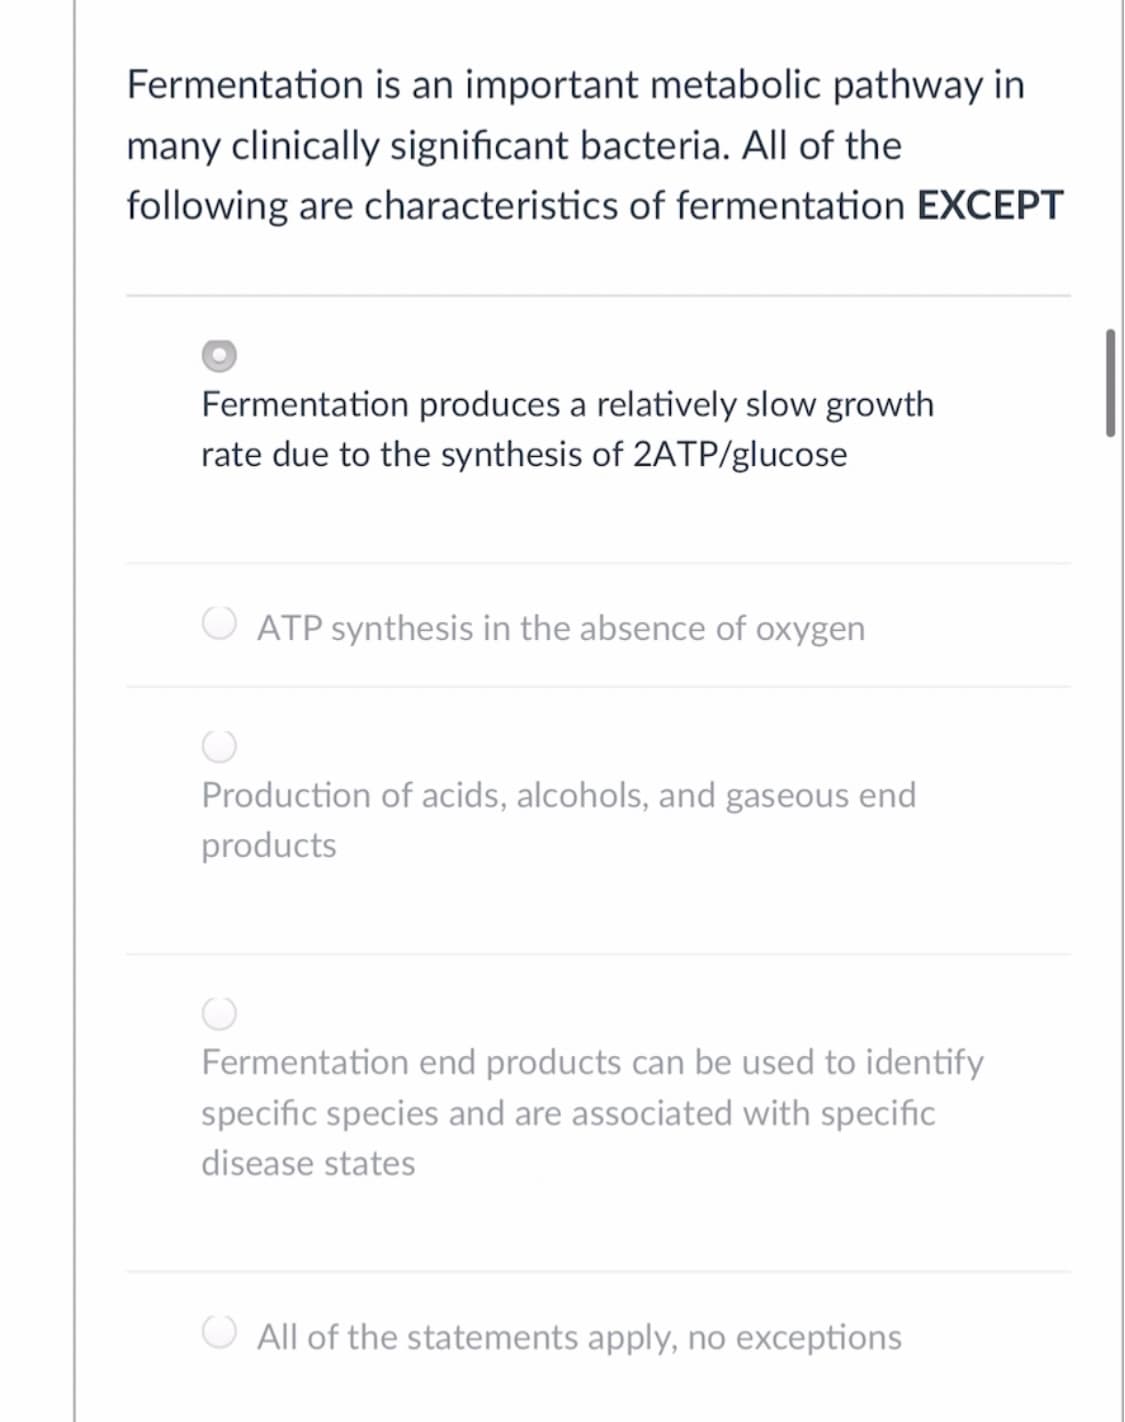 Fermentation is an important metabolic pathway in
many clinically significant bacteria. All of the
following are characteristics of fermentation EXCEPT
Fermentation produces a relatively slow growth
rate due to the synthesis of 2ATP/glucose
ATP synthesis in the absence of oxygen
Production of acids, alcohols, and gaseous end
products
Fermentation end products can be used to identify
specific species and are associated with specific
disease states
All of the statements apply, no exceptions
